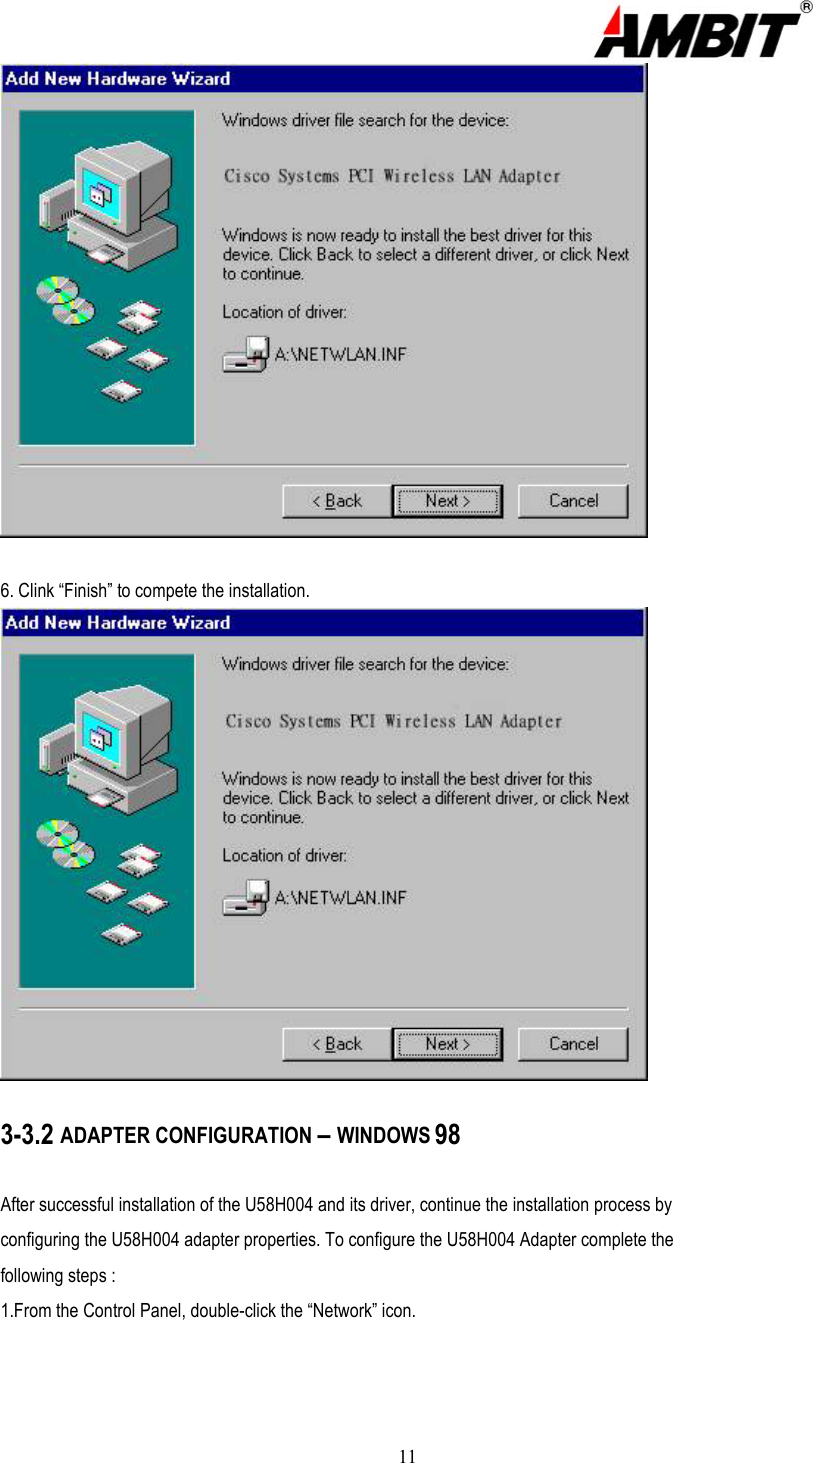  11  6. Clink “Finish” to compete the installation.  3-3.2 ADAPTER CONFIGURATION – WINDOWS 98  After successful installation of the U58H004 and its driver, continue the installation process by configuring the U58H004 adapter properties. To configure the U58H004 Adapter complete the following steps : 1.From the Control Panel, double-click the “Network” icon. 